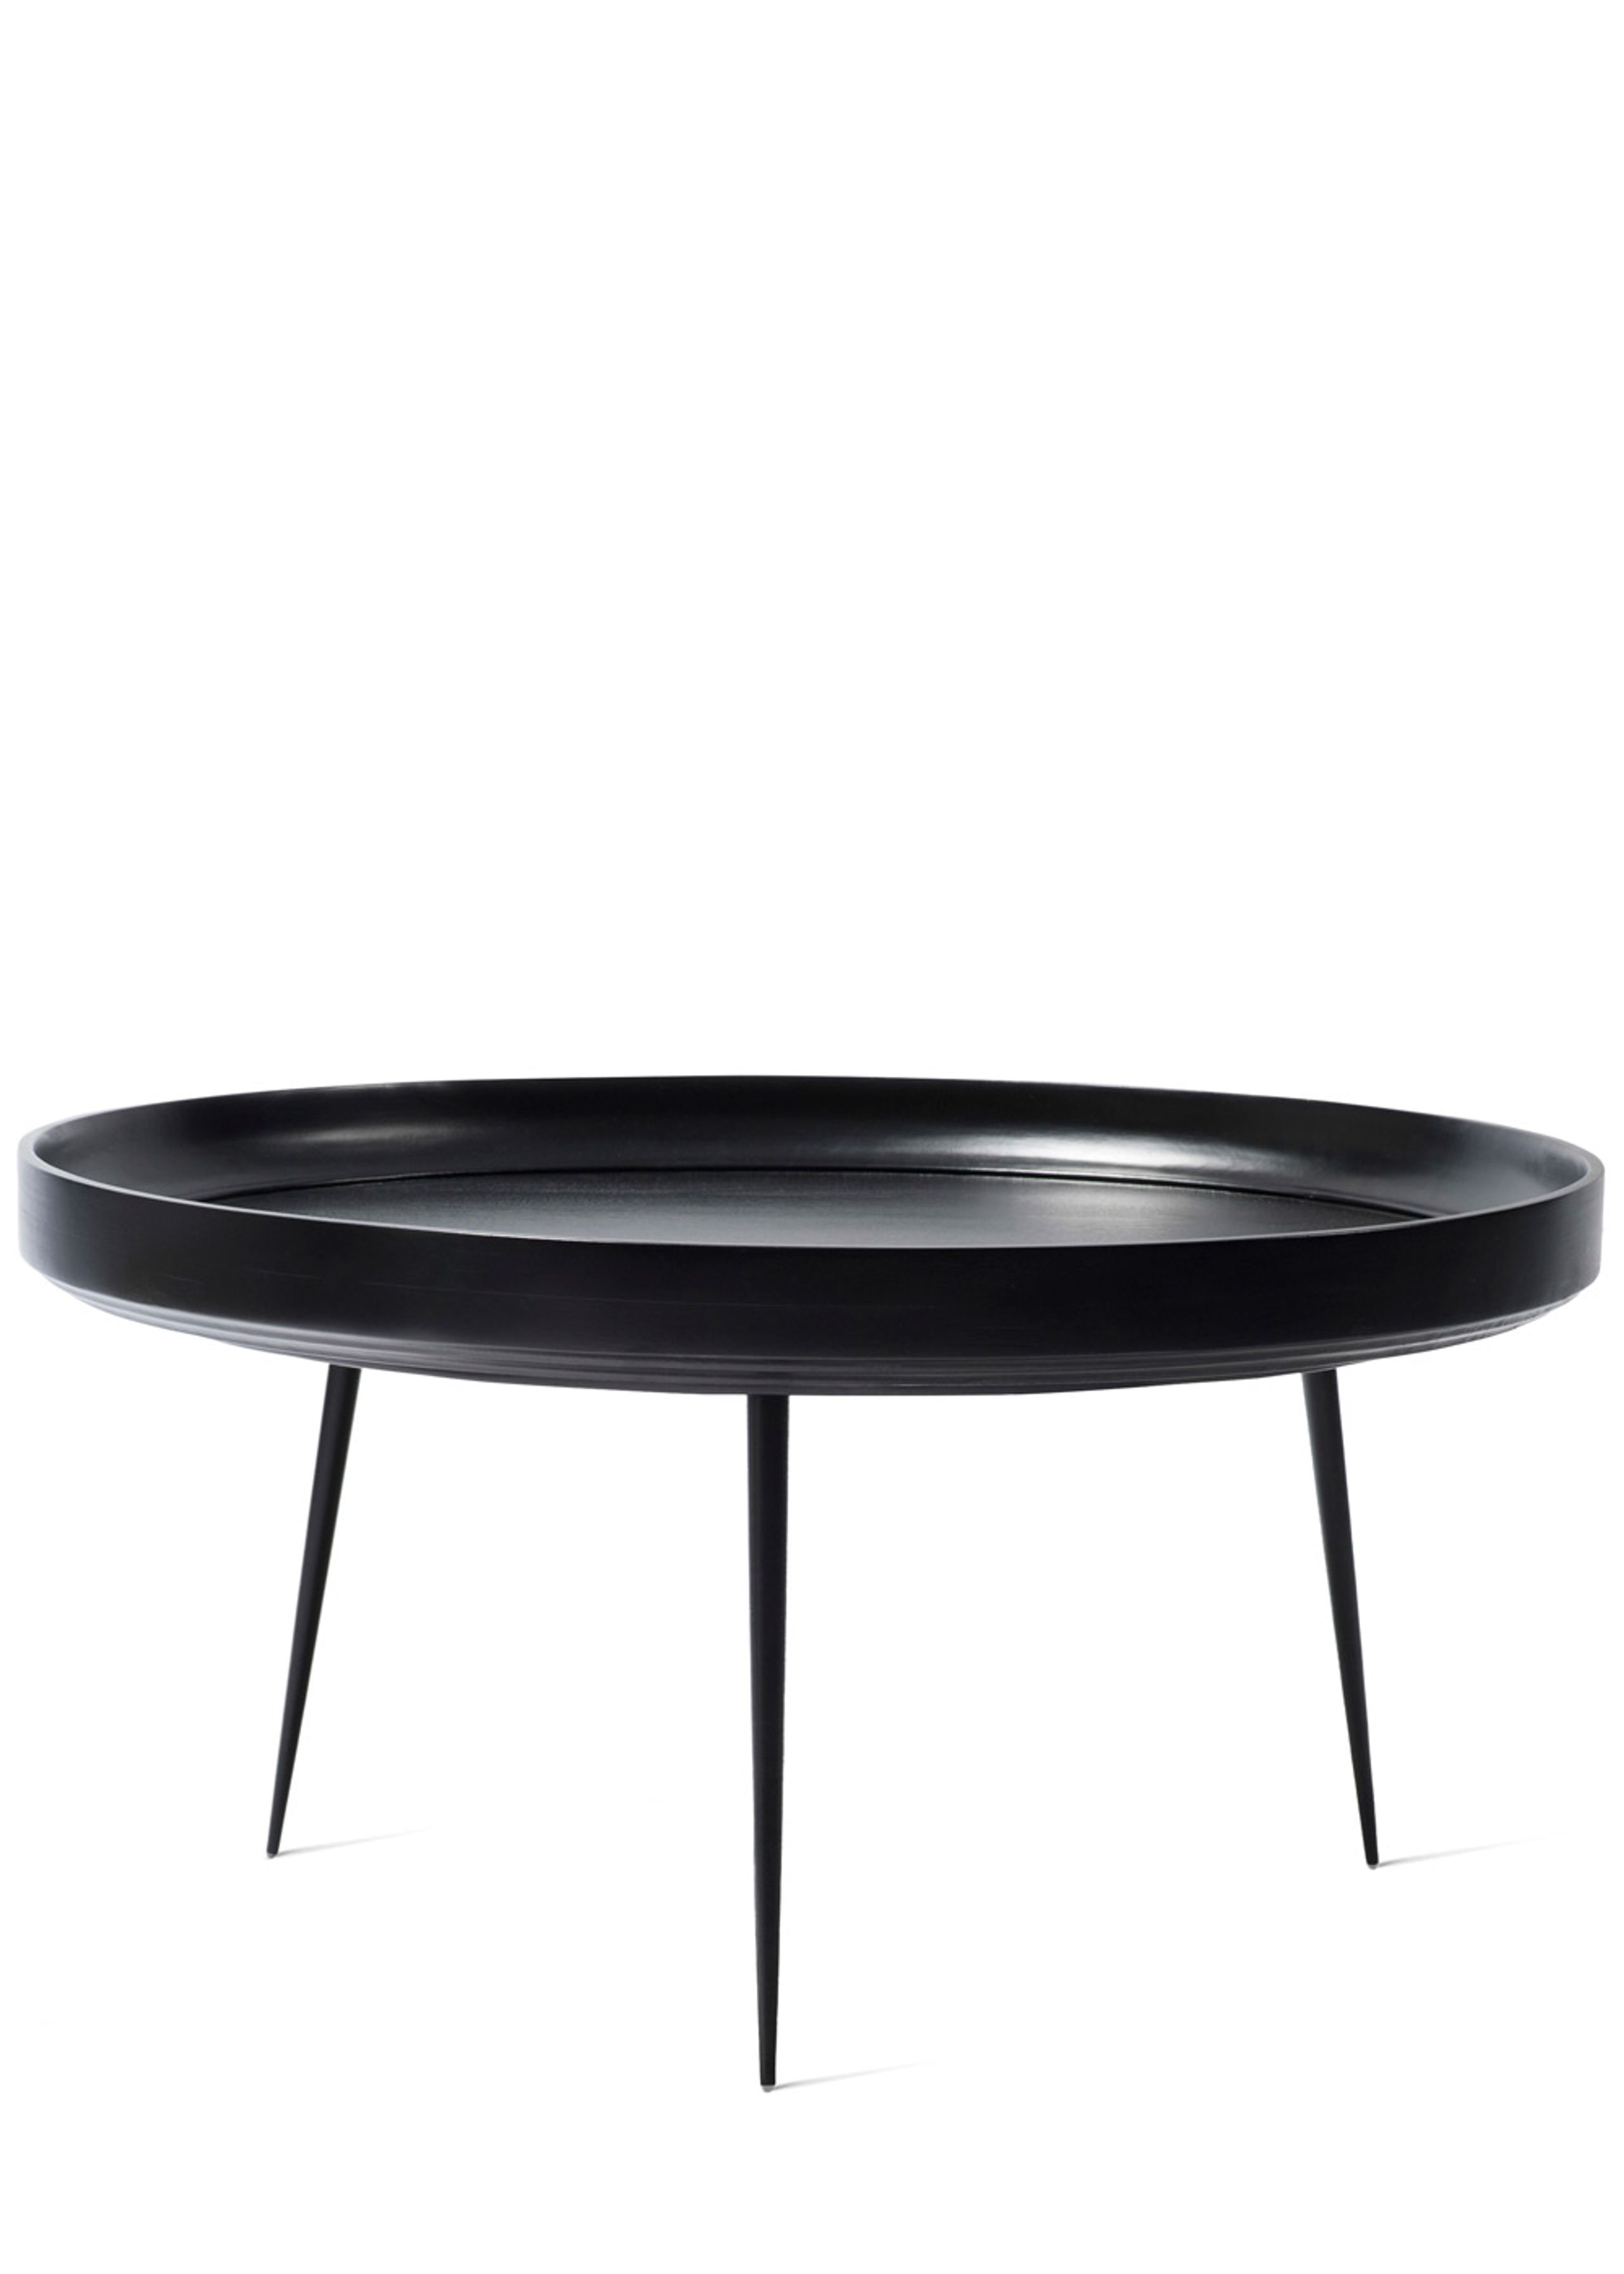 Mater - Table - Bowl Table - Black Stained Mango Wood - Extra Large